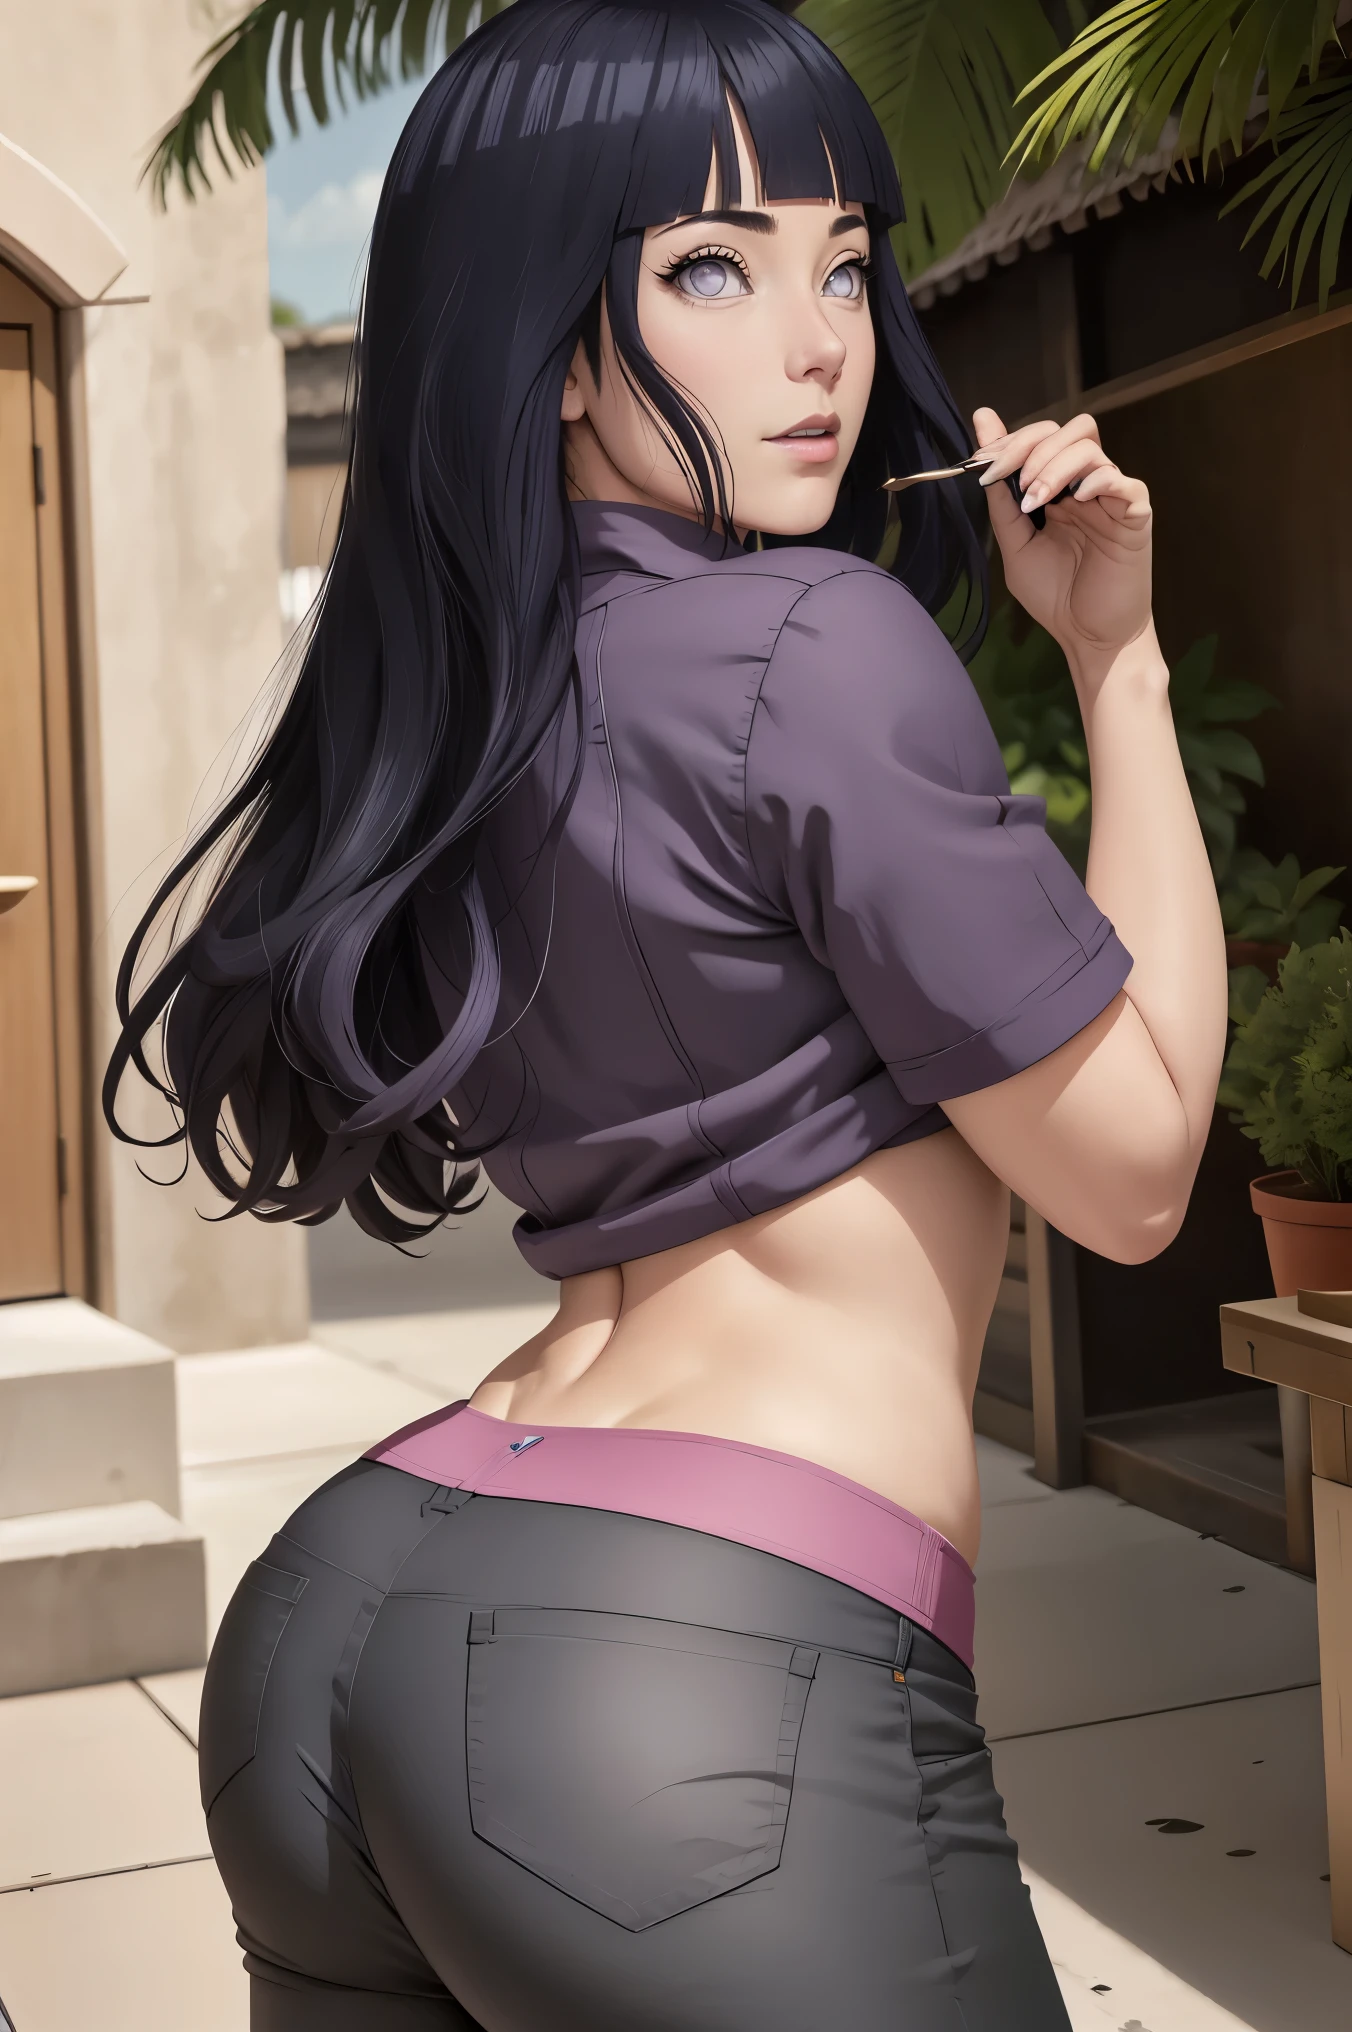 master part, absurdities, hinata\(boruto\), 1 girl, Alone,mature female, purple hood,layered sleeves, Brown jeans, outdoor, cloudy sky, perfect composition, detailed lips, big breasted, beautiful face, body proportion, blush, (pink lips), short black hair (black fur), lilac eyes, soft look, super realistic, detailed, Photoshoot, realistic face and body, realistic hair, realistic eyes, realistic nose, realistic lips, Brown jeans, cheered up, dancing lightly. on your back, with chin under shoulder, looking back sensually, sexy smile, Closed mouth. different pose.